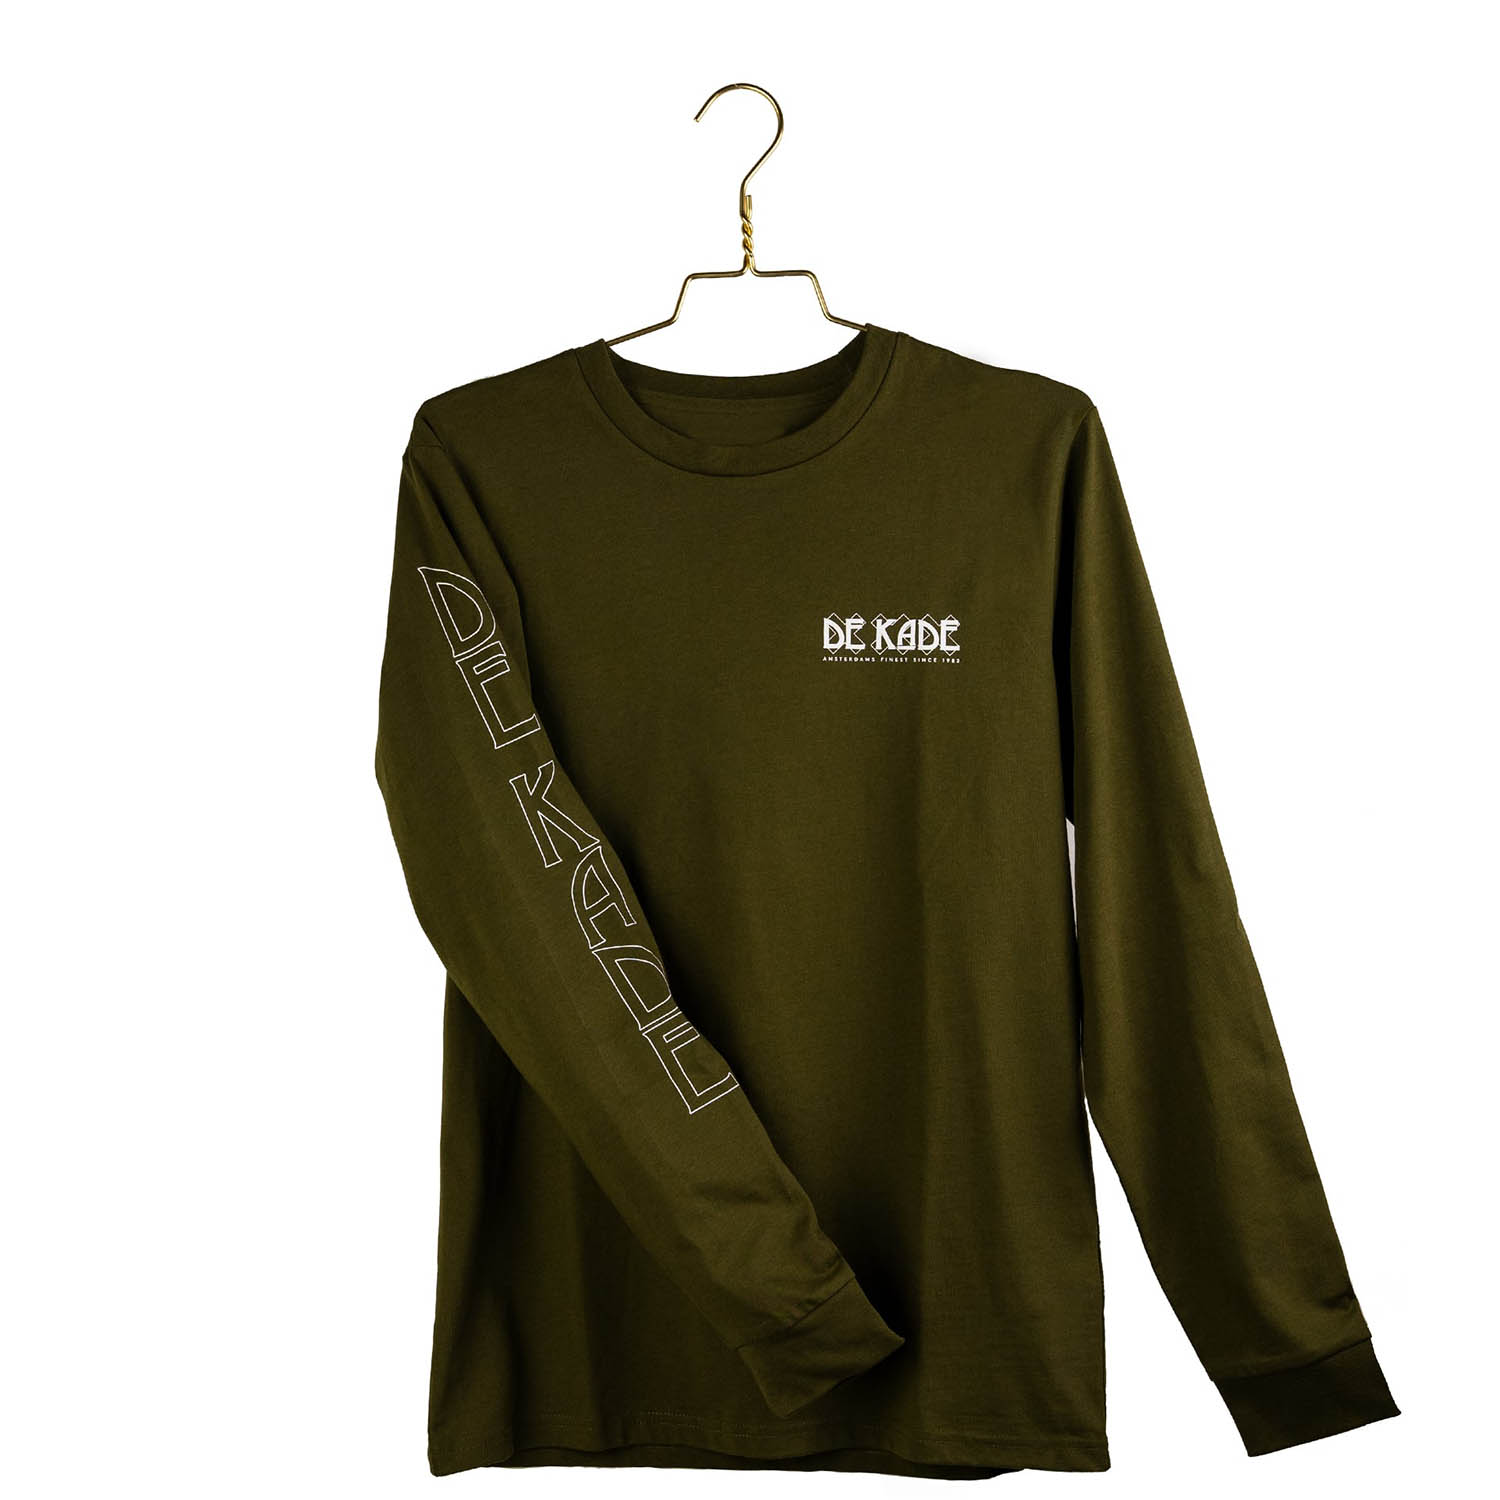 Mean Green - Longsleeve first image